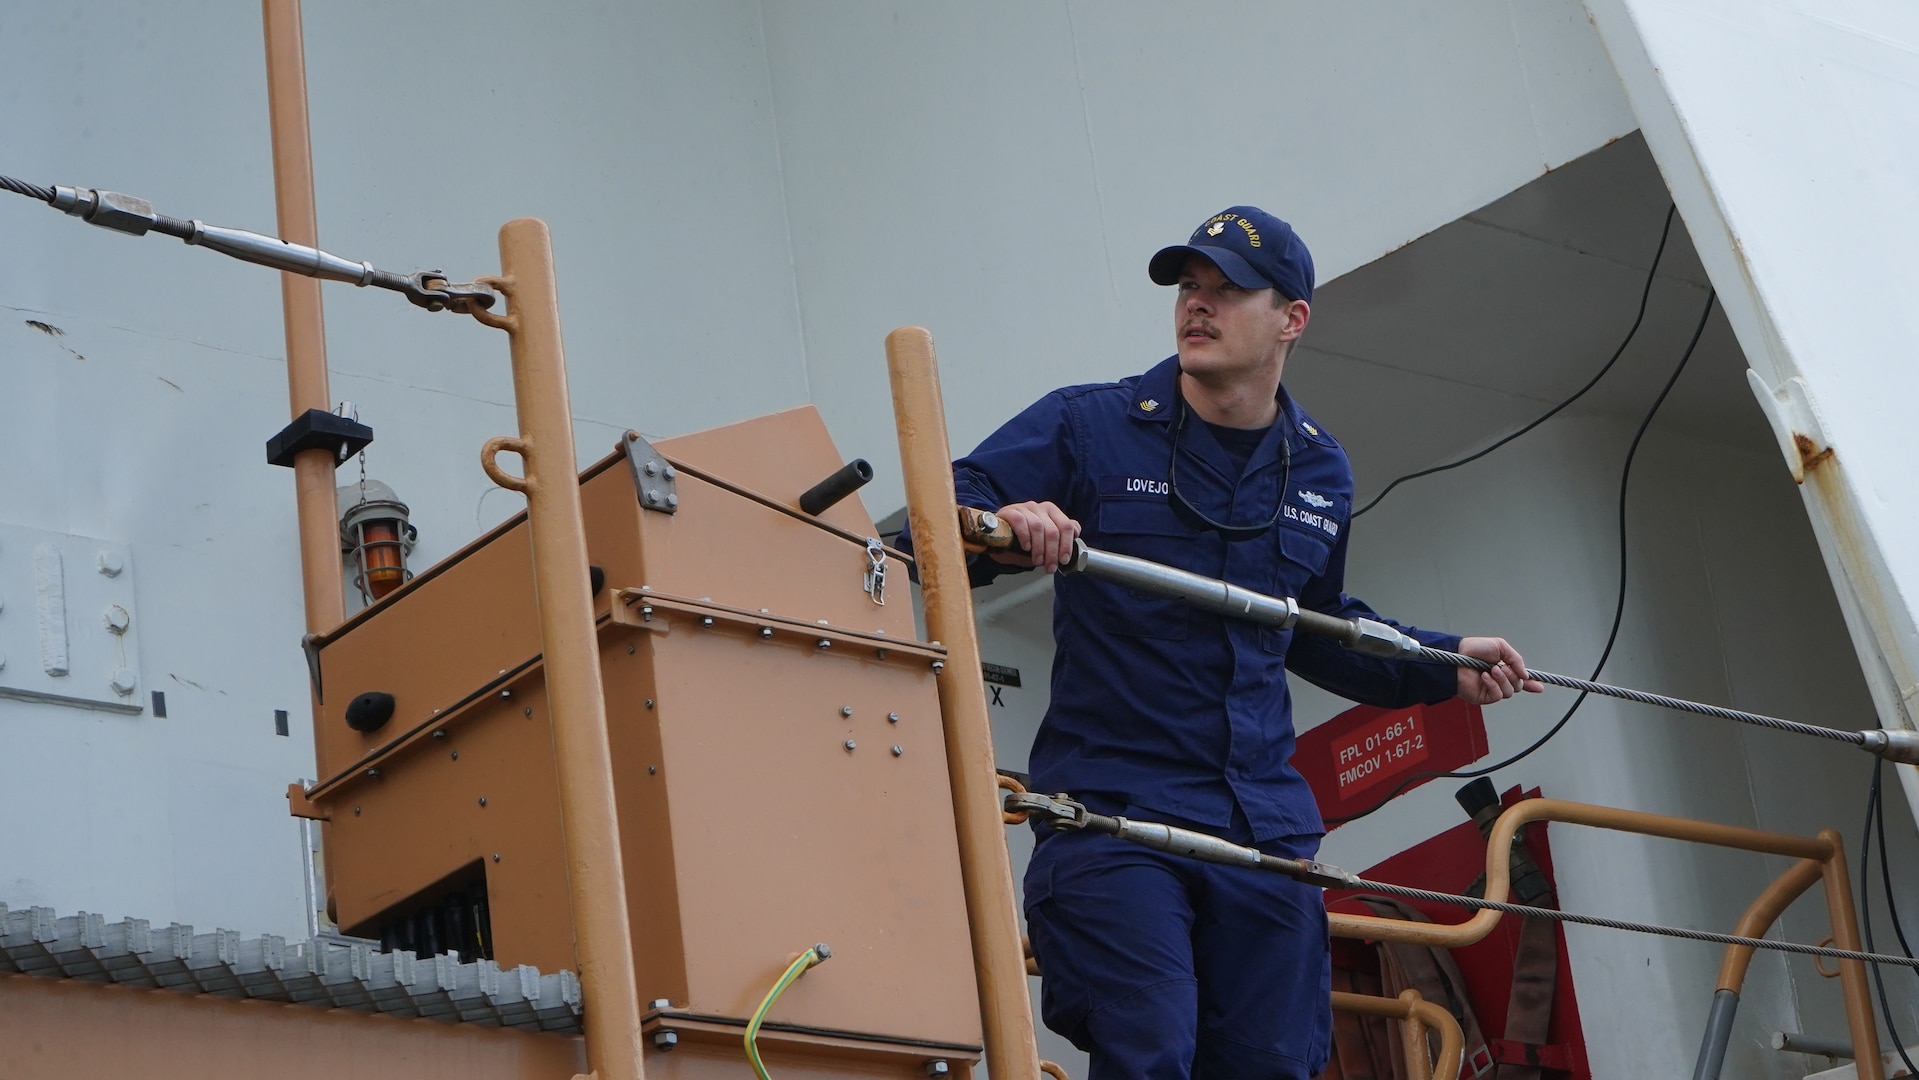 U.S. Coast Guard Petty Officer 1st Class Edward Lovejoy, a crew member assigned to USCGC Dependable (WMEC 626), assists with safety maneuvers during the cutter's return to home port in Virginia Beach, Virginia, Feb. 23, 2023, following a 50-day maritime safety and security patrol. Dependable's crew patrolled the Florida Straits and Windward Pass in support of Homeland Security Task Force - Southeast and Operation Vigilant Sentry in the Coast Guard Seventh District's area of responsibility. (U.S. Coast Guard photo by Petty Officer 3rd Class Kate Kilroy)